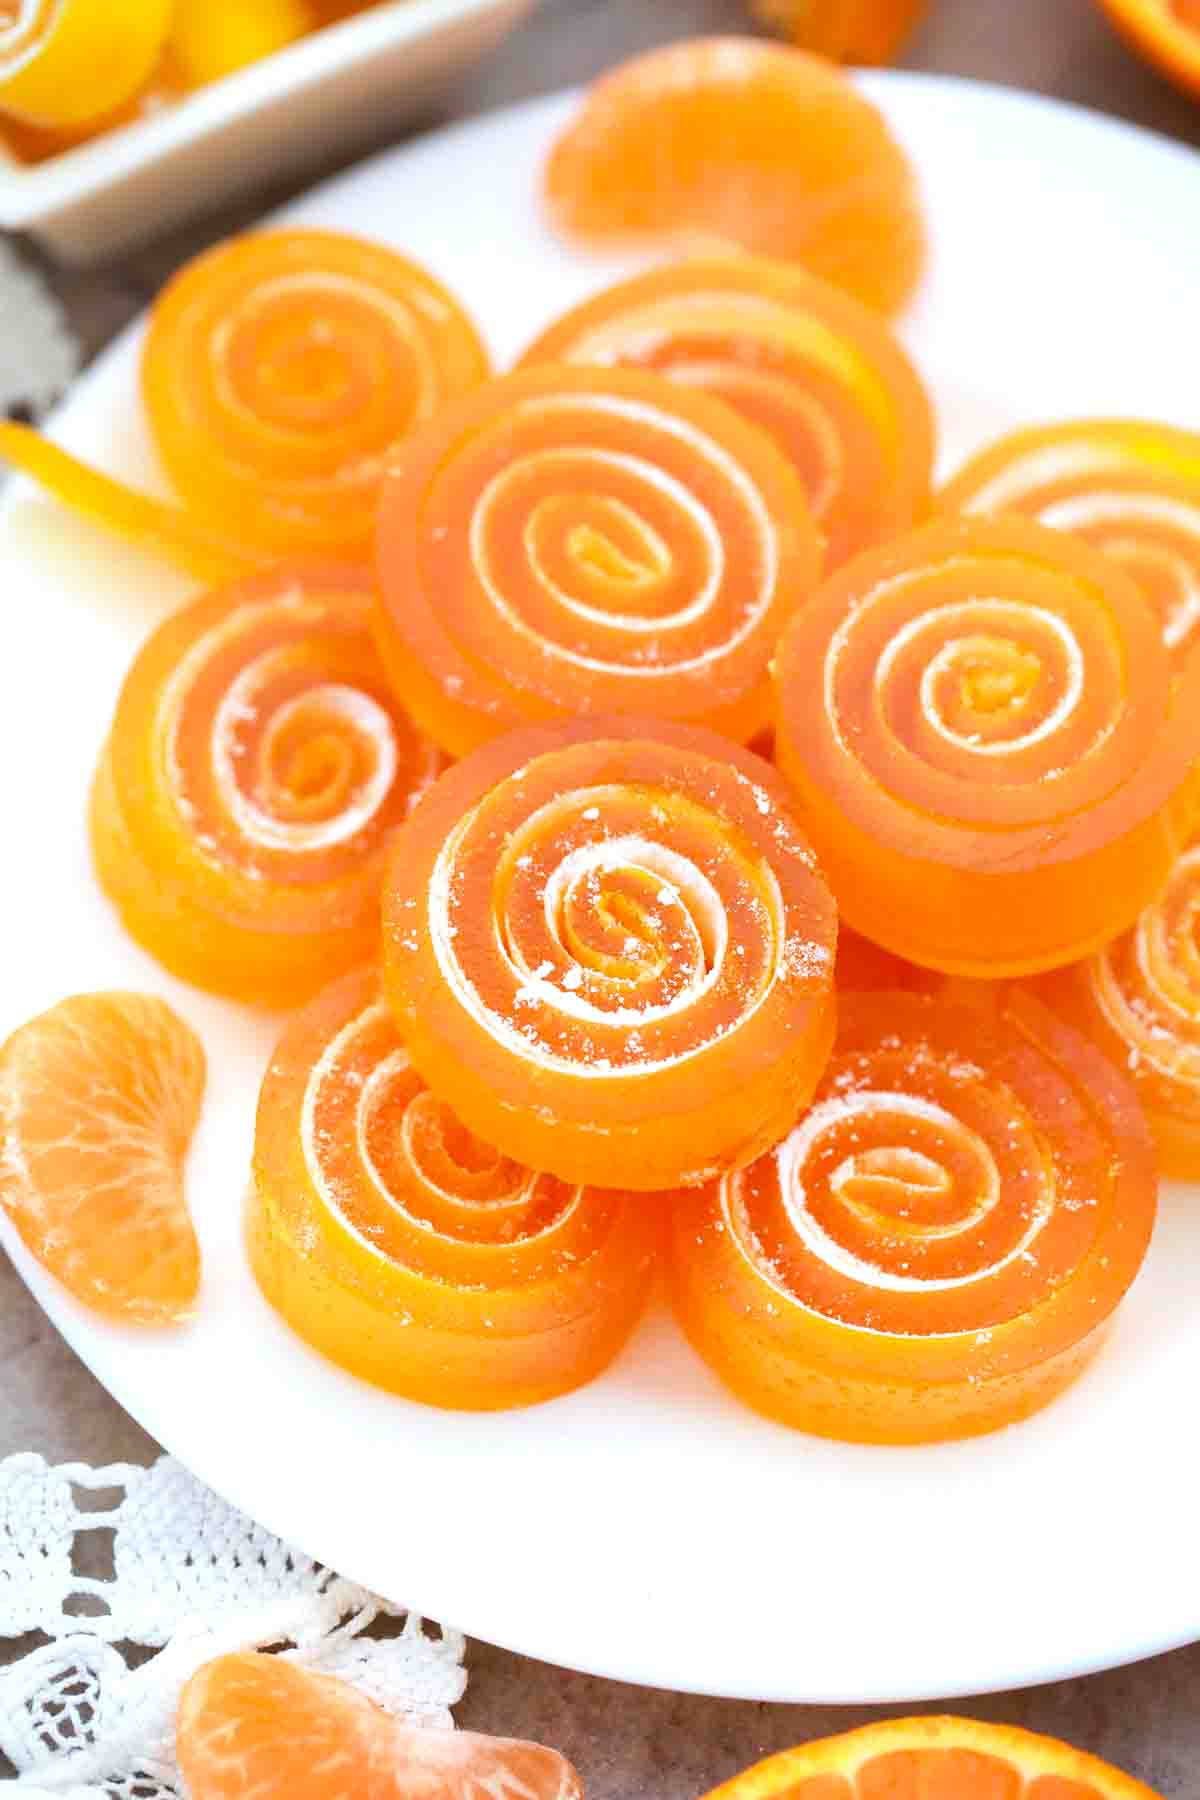 Orange Jelly Candy Recipe [Video] - Sweet and Savory Meals